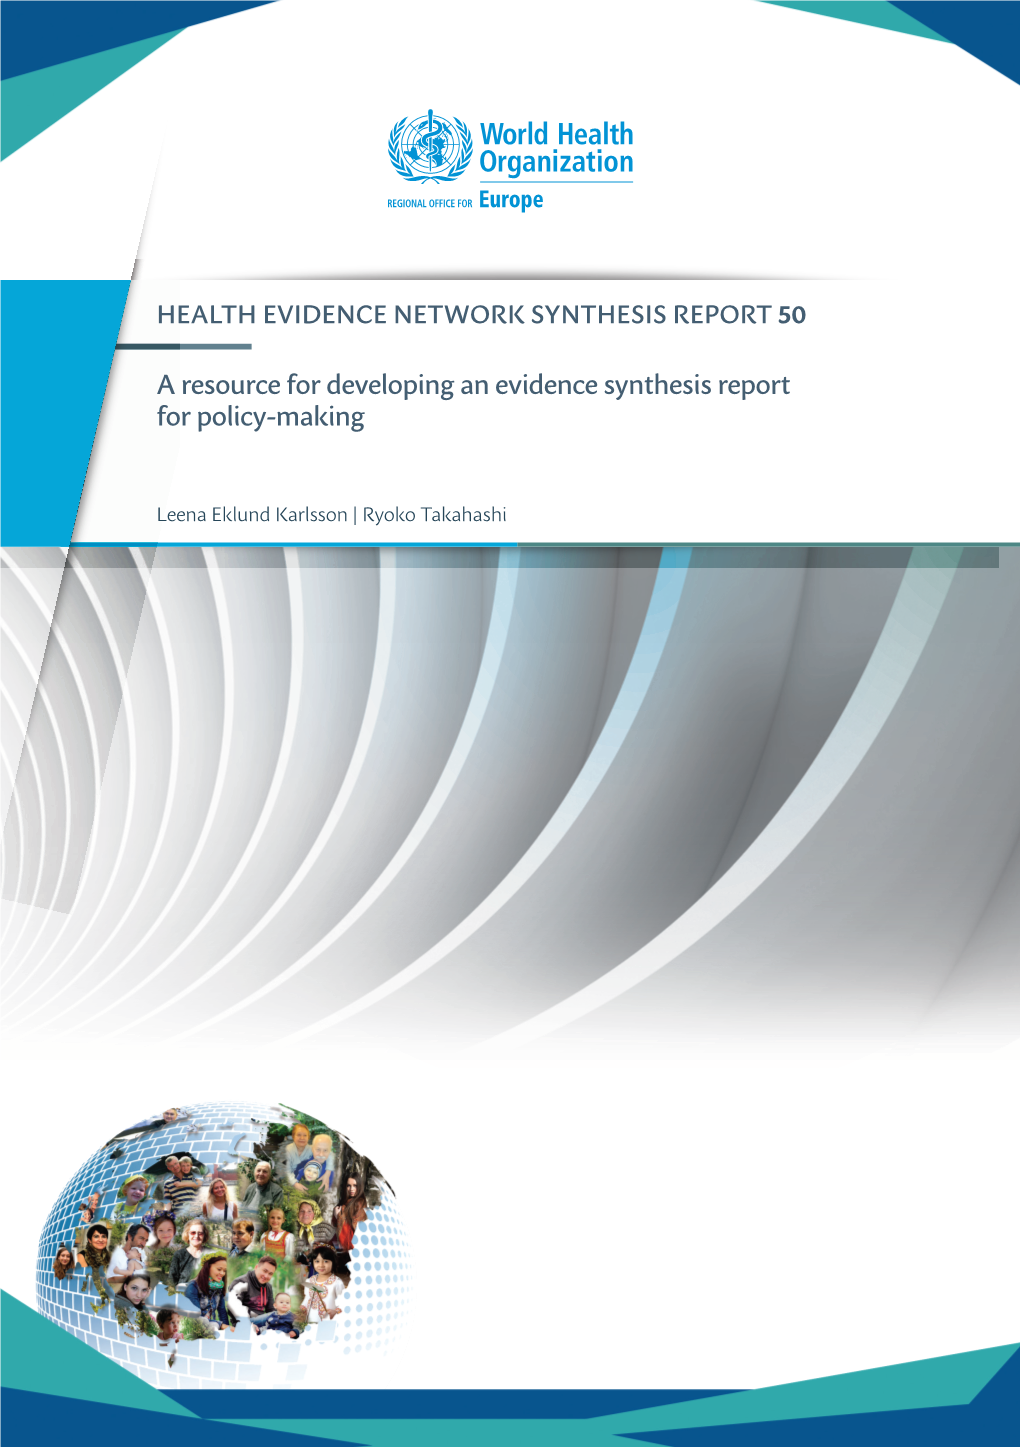 A Resource for Developing an Evidence Synthesis Report for Policy-Making